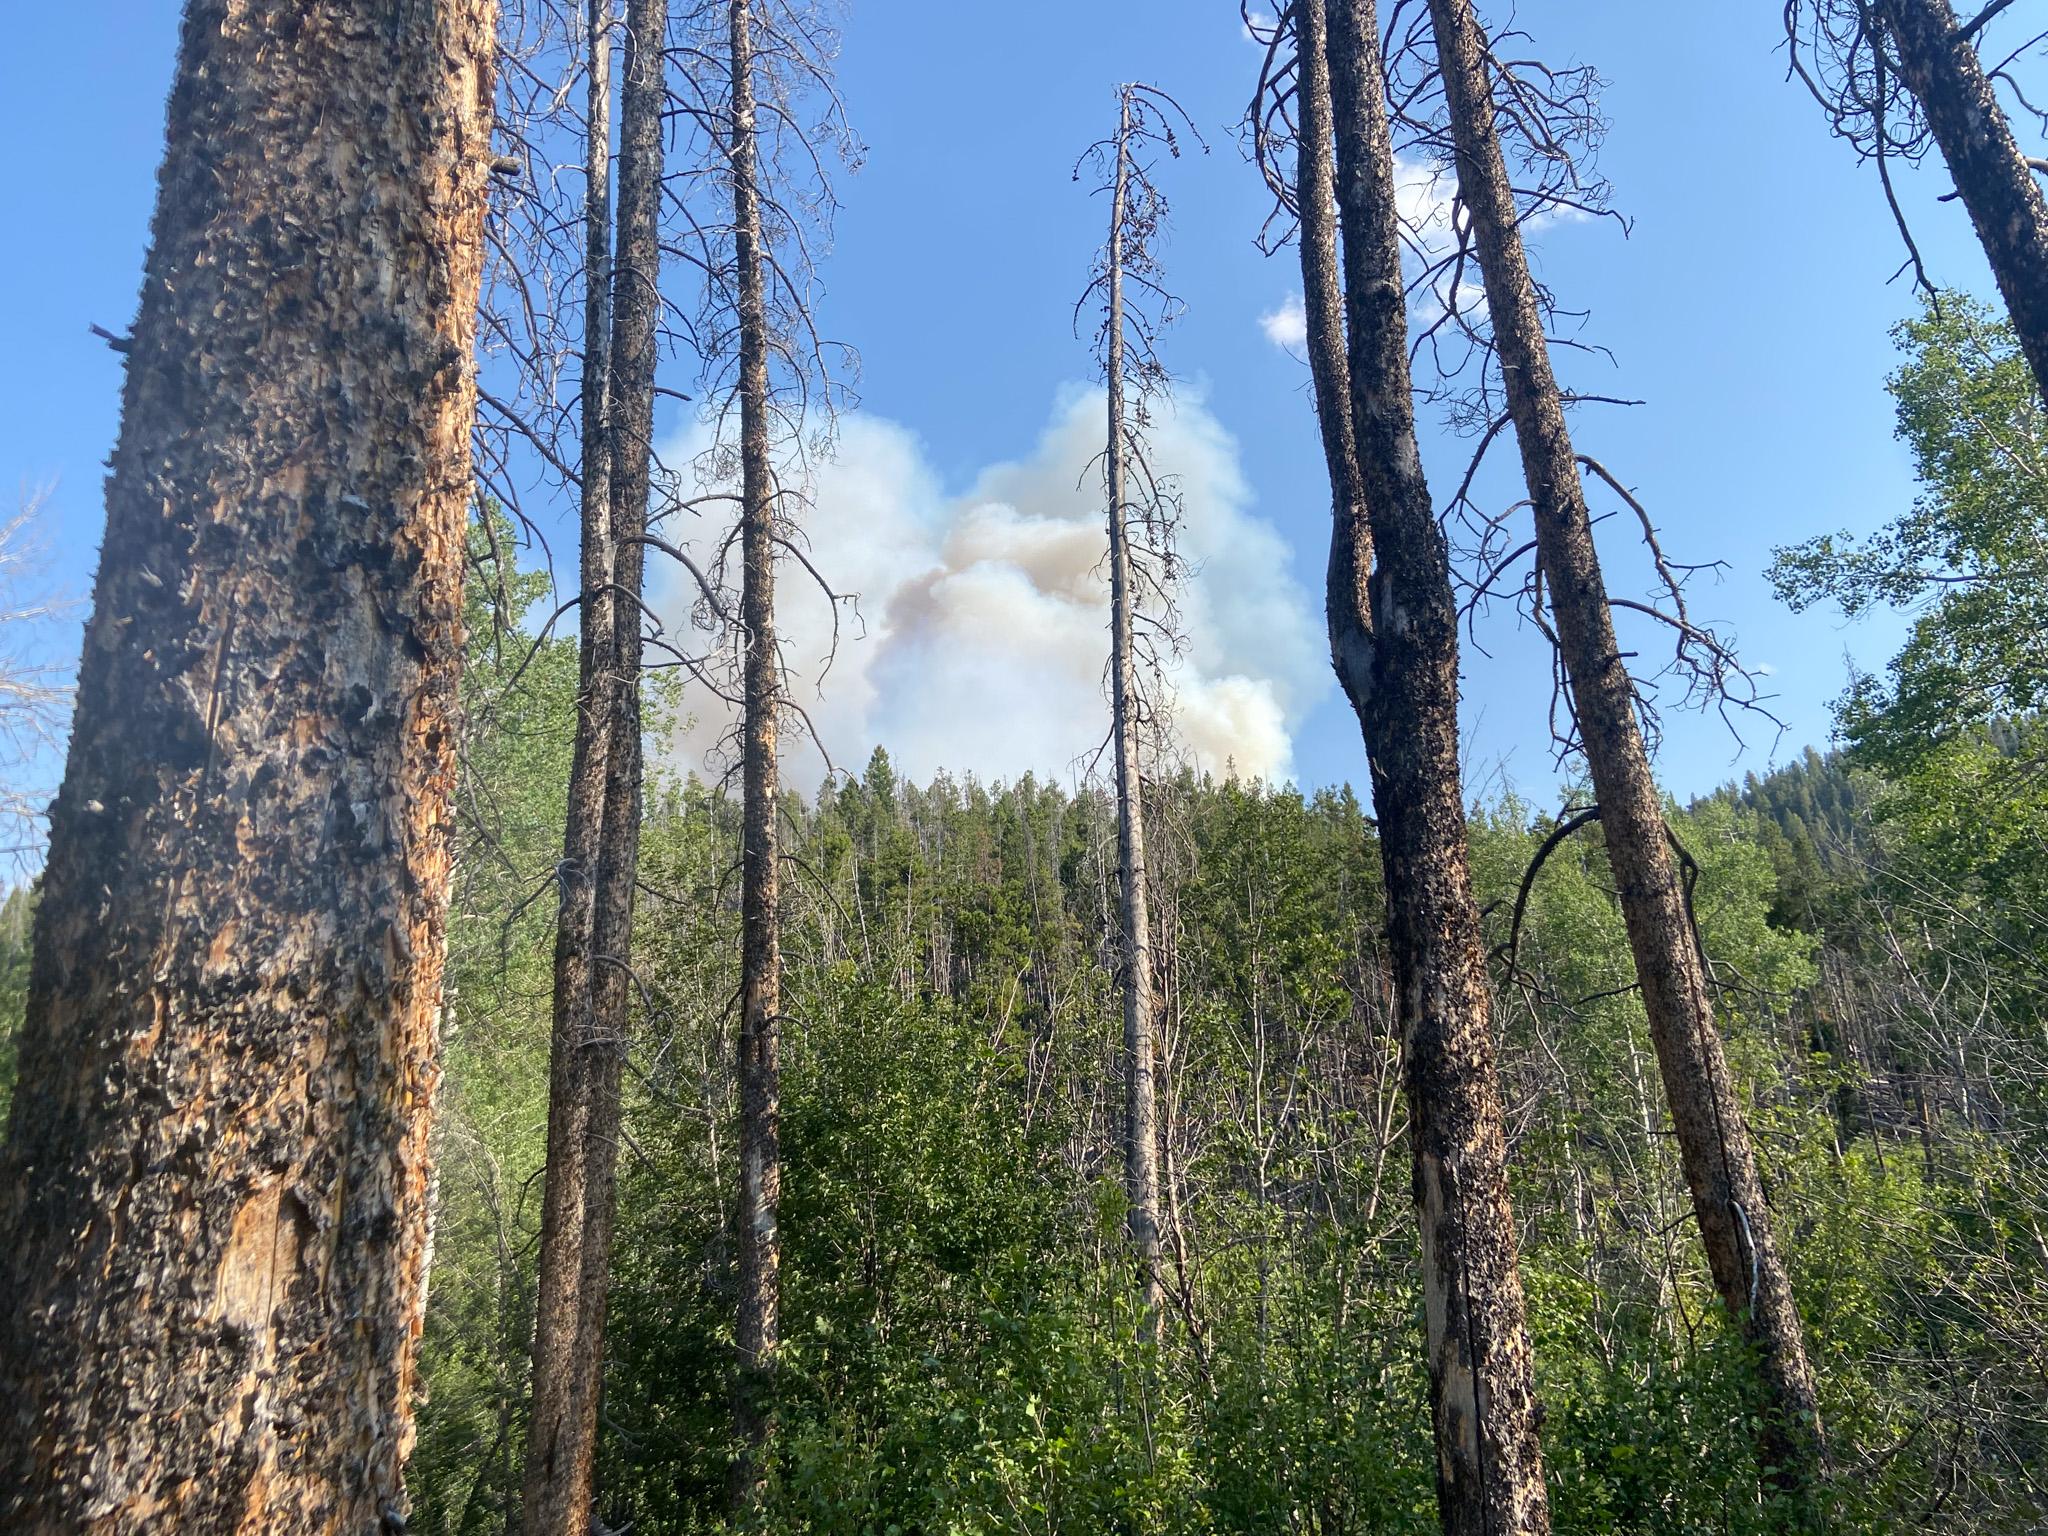 Smoke column extends from a forested landscape, as viewed through conifer trees on the mountain. Blue skies in the background.